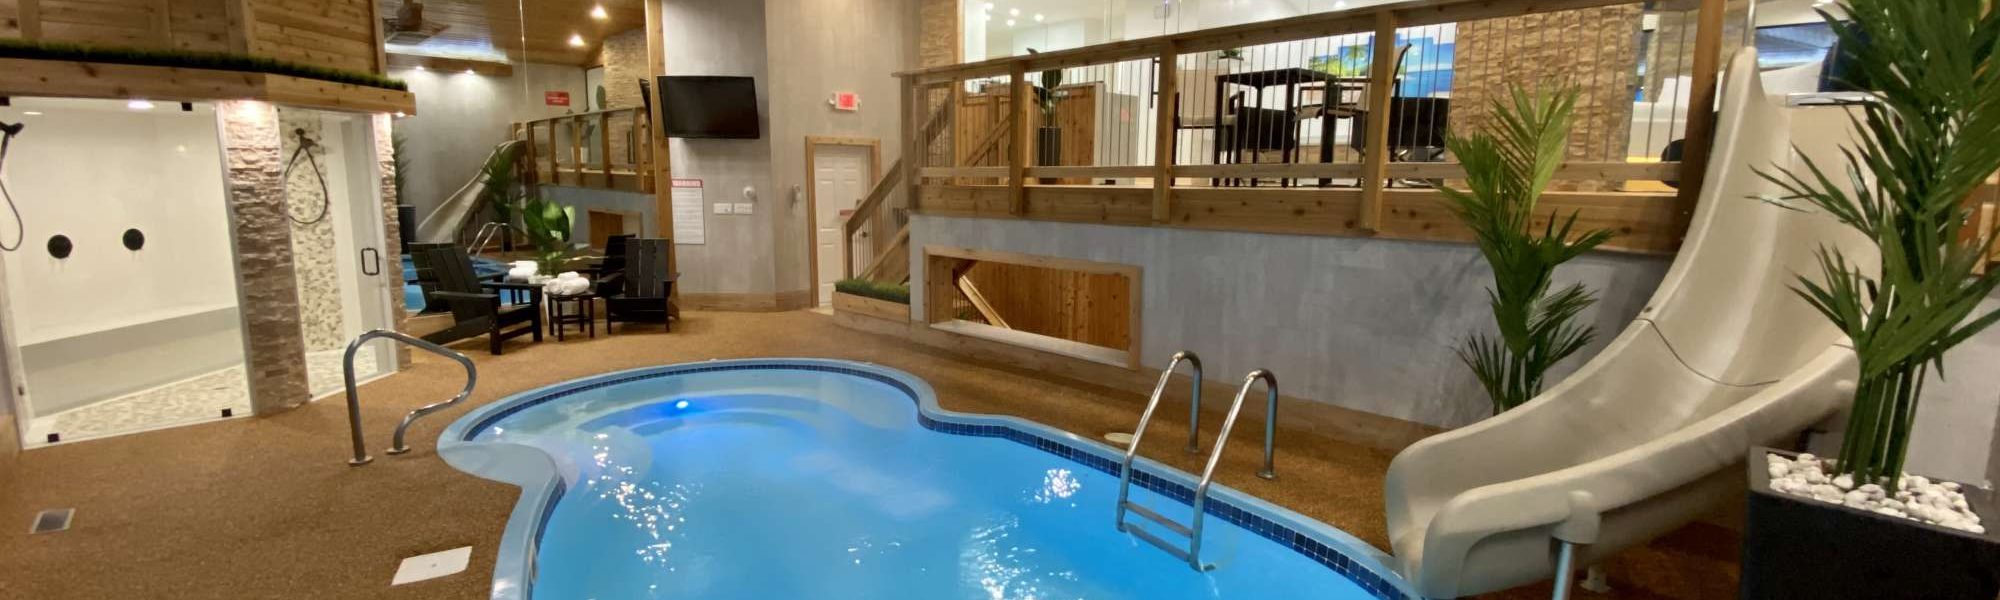 Swimming Pool Suite at Sybaris in Mequon, WI